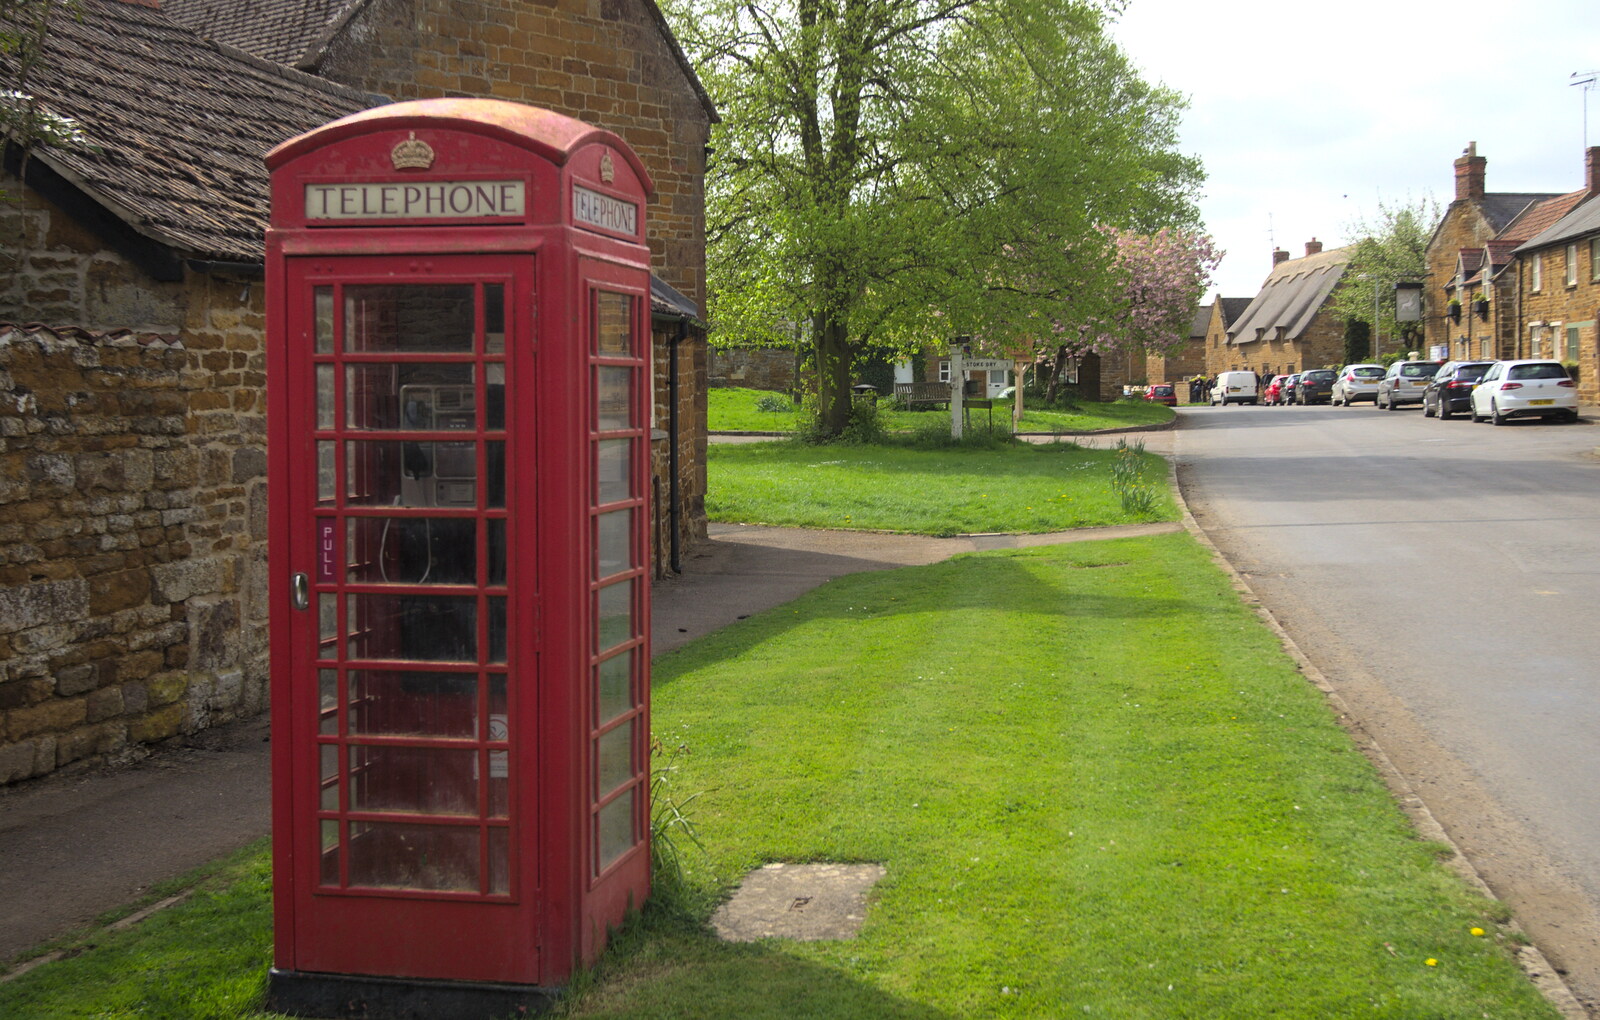 Lyddington's K6 phone box from The BSCC Weekend Away, Lyddington, Rutland - 9th May 2015